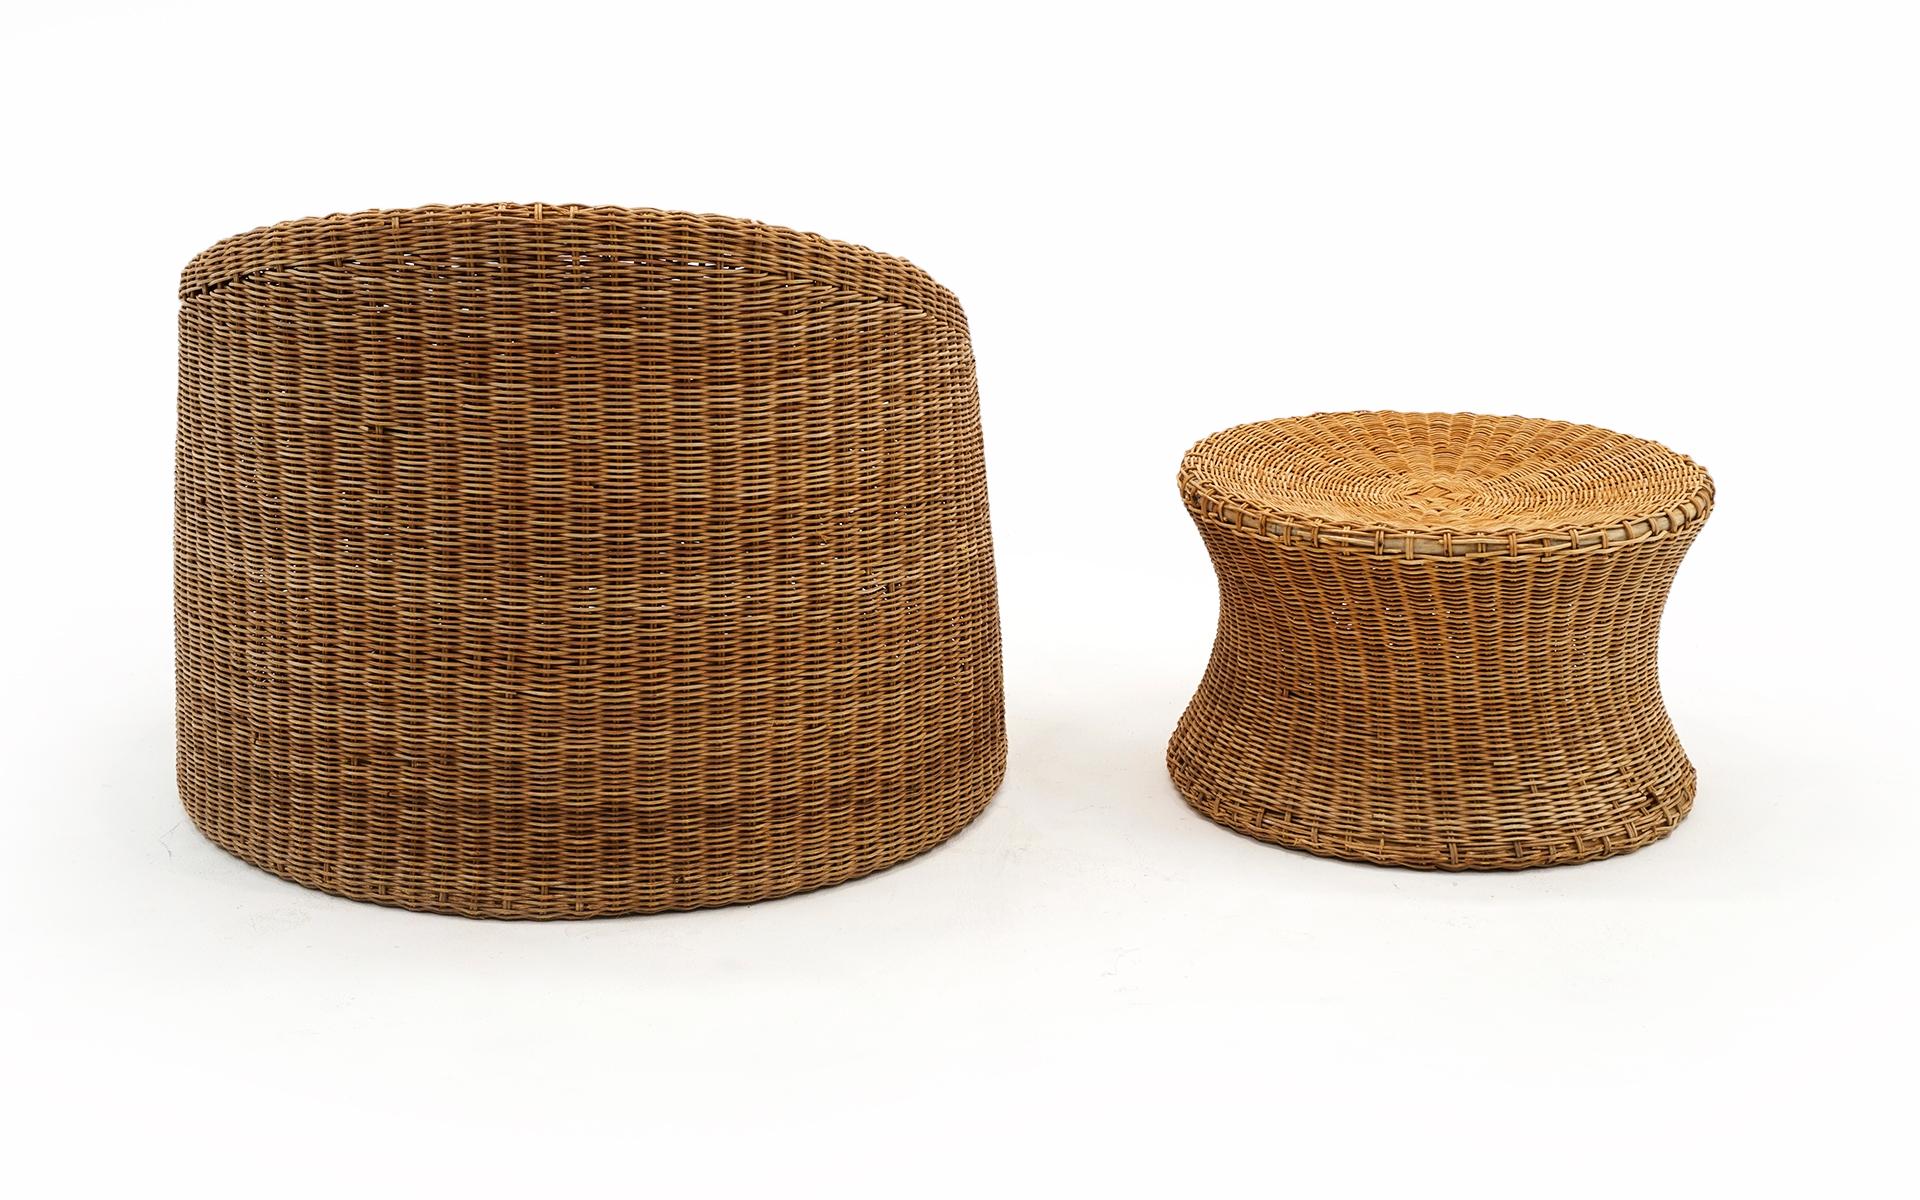 Mid-Century Modern Wicker Chair and Ottoman by Eero Aarnio, Finland, 1960s